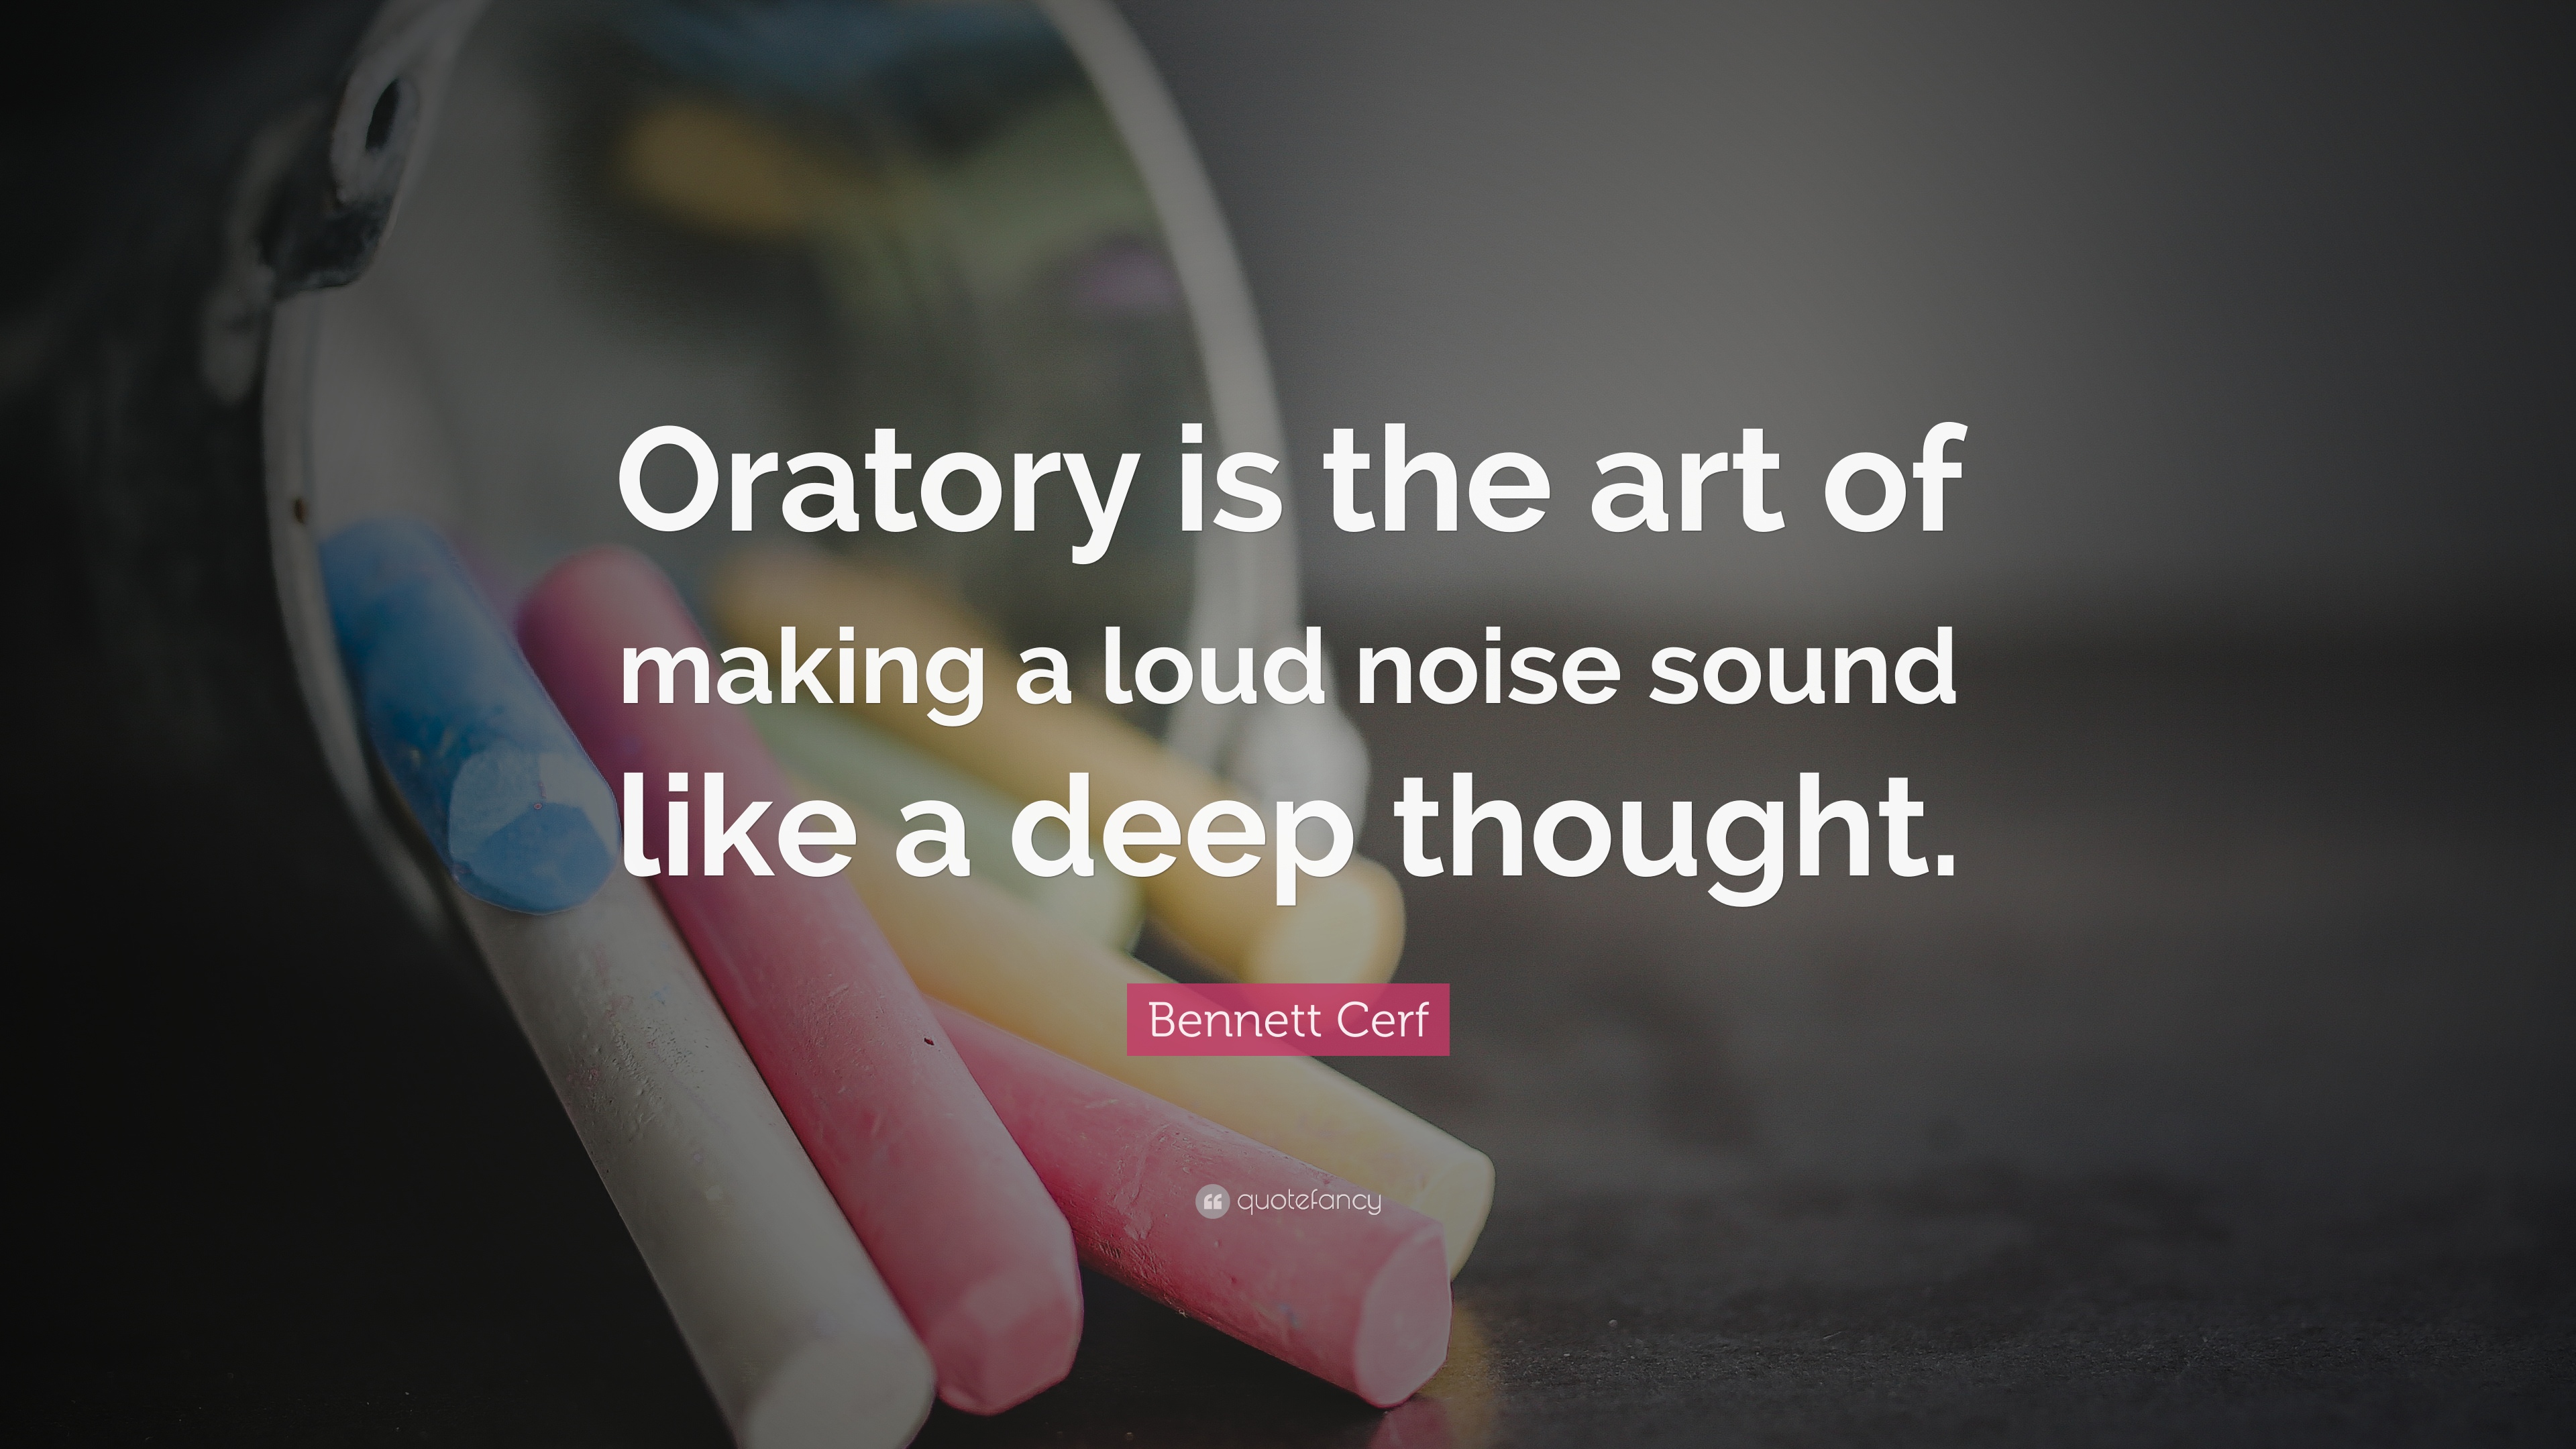 Bennett Cerf Quote: “Oratory is the art of making a loud noise sound